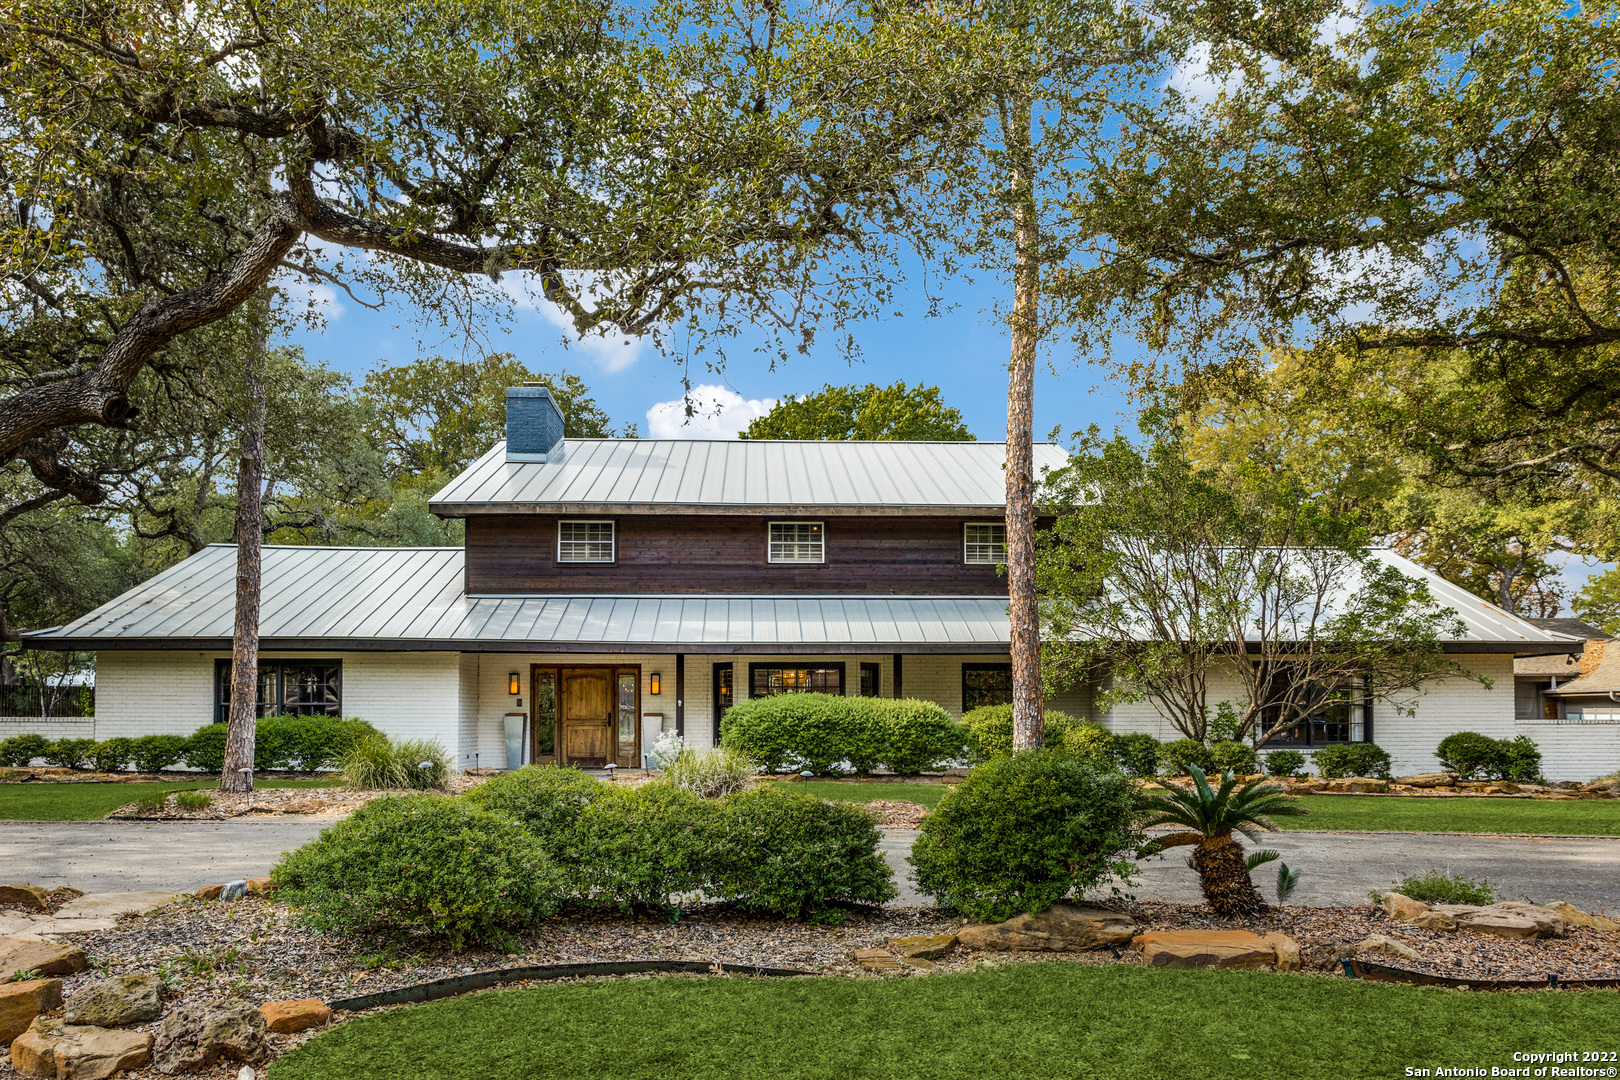 Take advantage of this rare opportunity by Landa Park on "The Hill" near downtown New Braunfels! Luxurious country living can be found within this five-bedroom, three-and-a-half-bathroom home located on a corner lot in one of New Braunfels most coveted neighborhoods. Although this home features many modern features, it still holds some of its unique '60s features, such as rockwork and wood-lined office space. Within this 5027 sqft home, you will find multiple living and dining spaces inside and an exquisite backyard with a large, covered patio and in-ground pool. This space is ideal for those who love to entertain. Property also includes a detached 3-car garage and a spacious, climate-controlled work room. Additional structures are a climate-controlled storage building and a greenhouse. Schedule your private showing of this exquisitely designed New Braunfels home; photos do not do it justice!